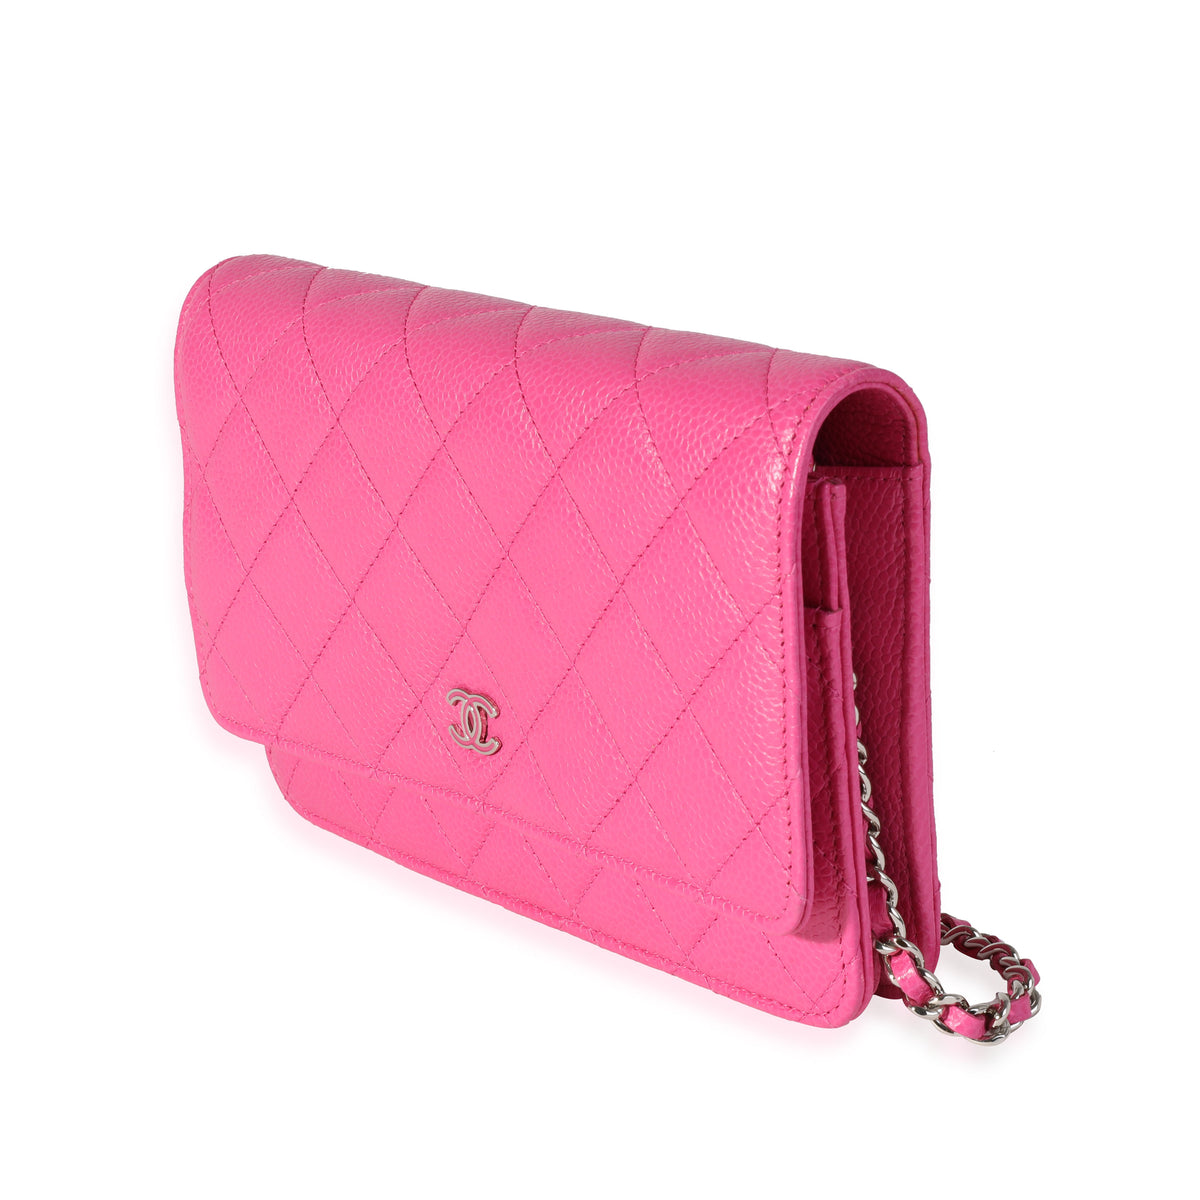 Authentic Chanel Pink Quilted Lambskin Leather Wallet on Chain Woc Messenger Bag